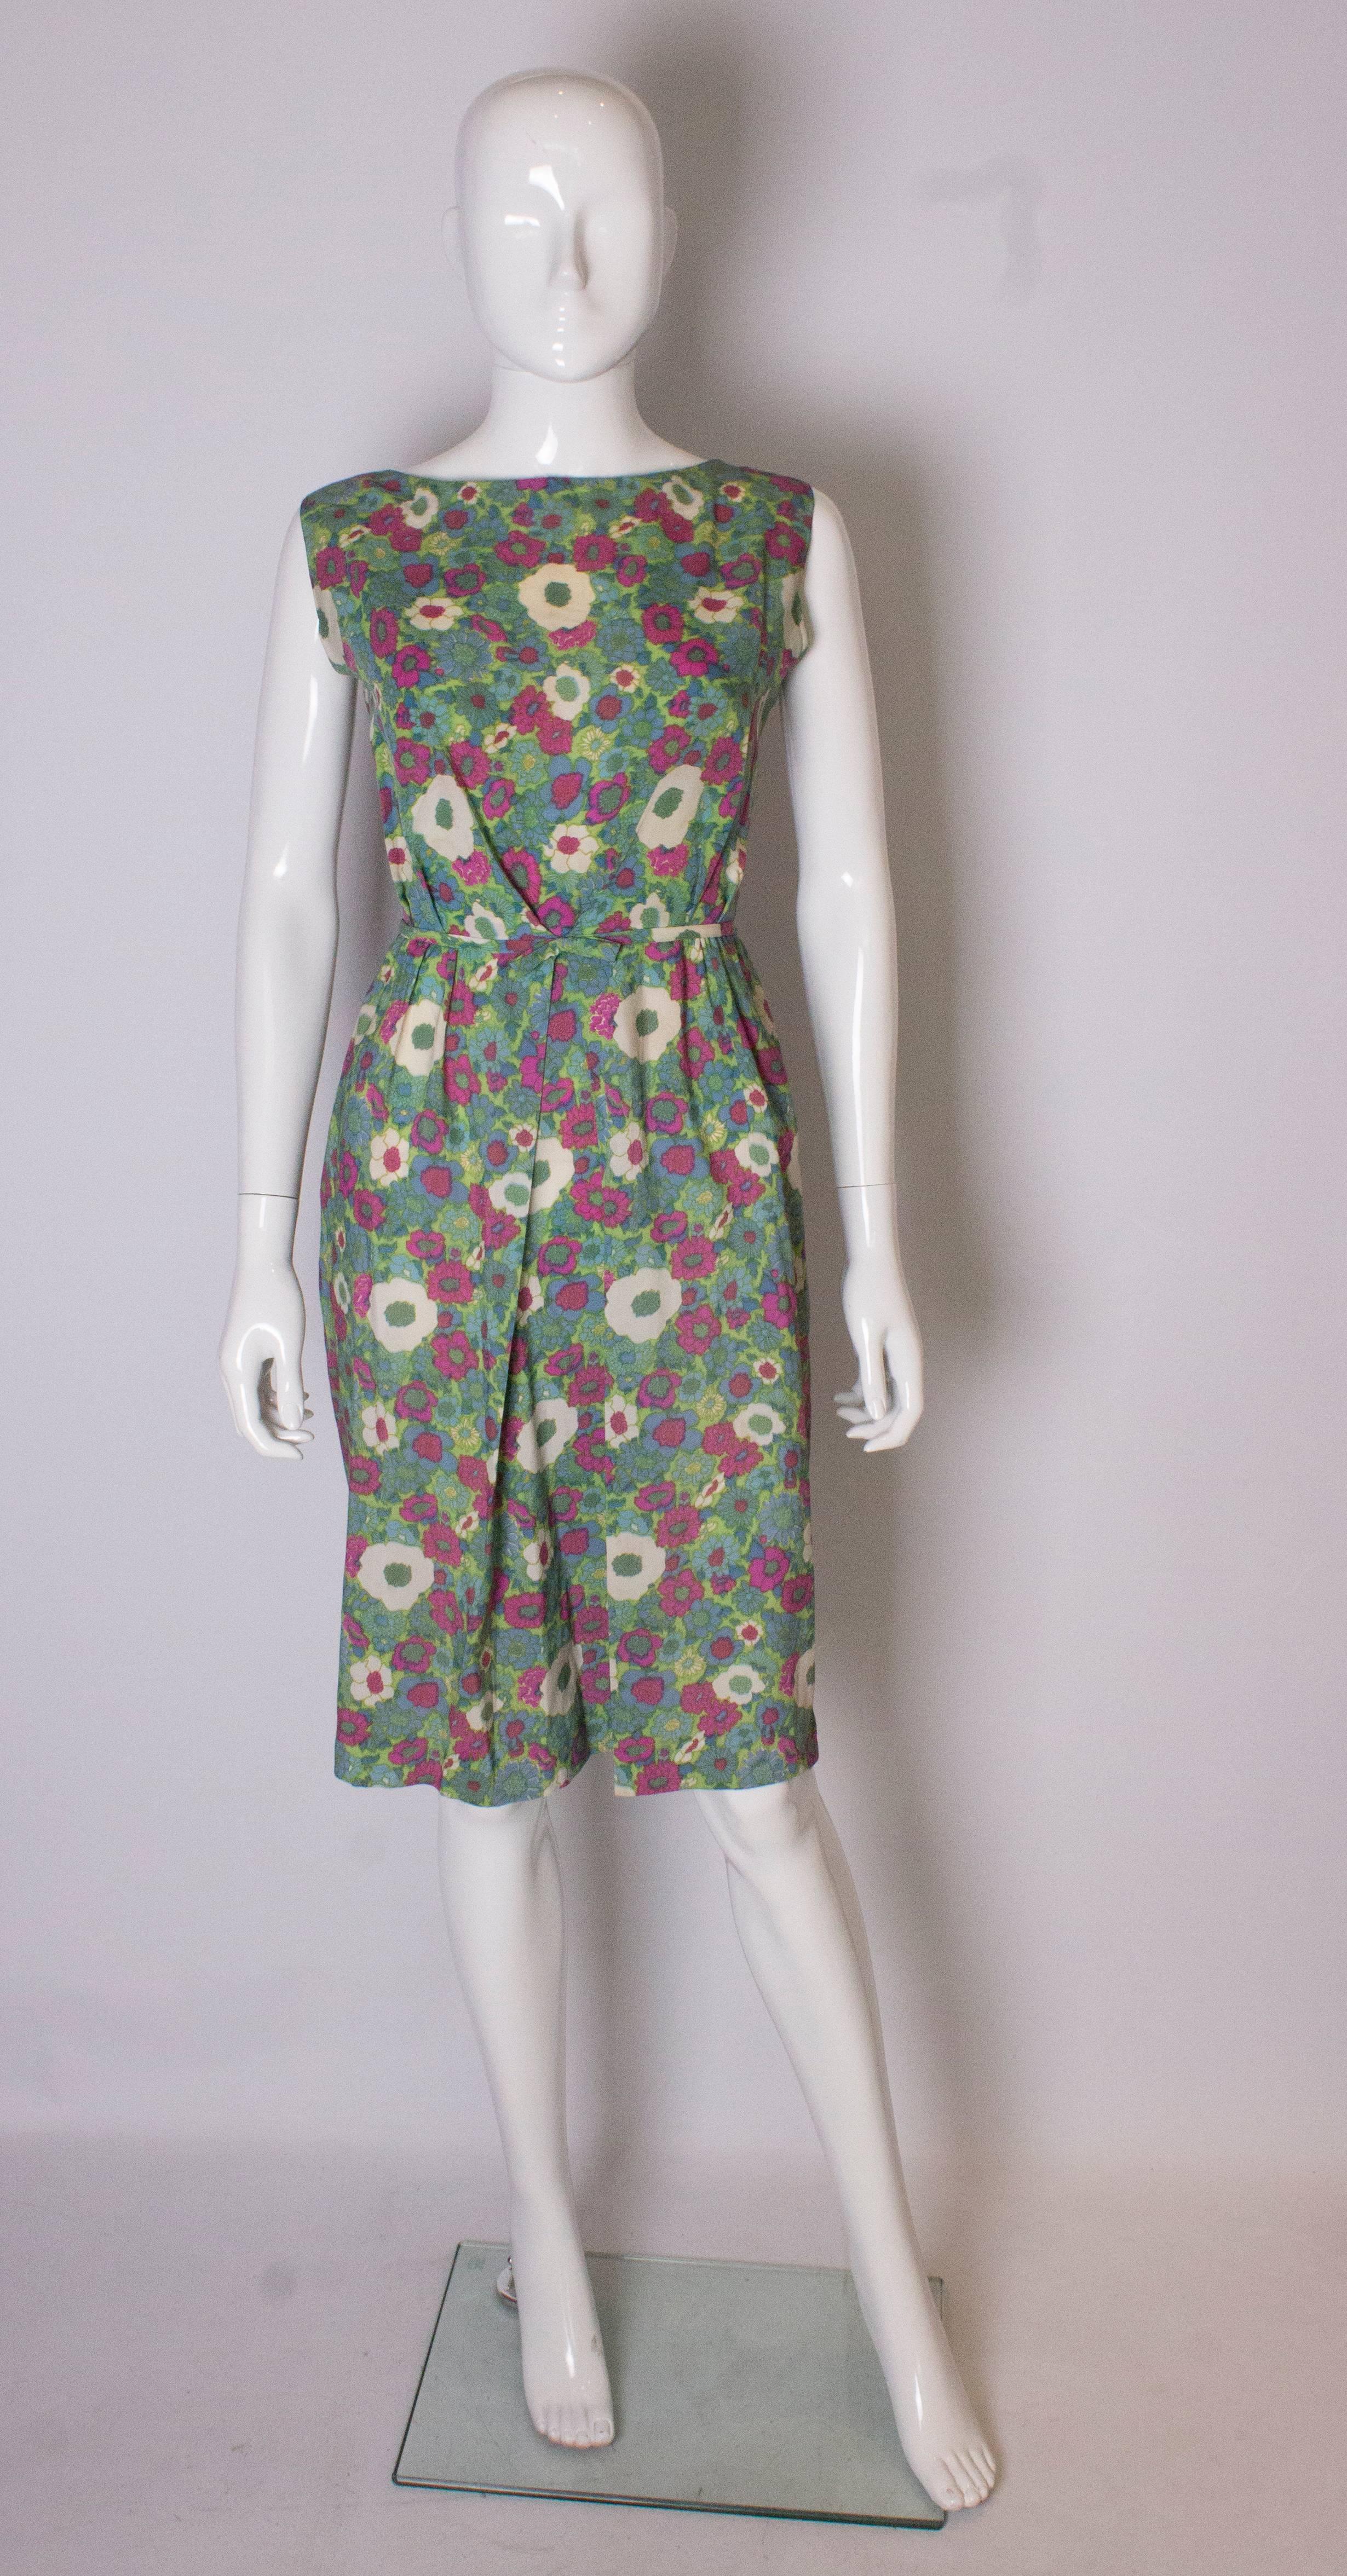 A pretty dress for Spring/Summer, in a green, burgundy, blue and cream floral print. The dress has a pleat and gathering at the front with a  bow. It opens at the back with 5 buttons and 3 poppers.